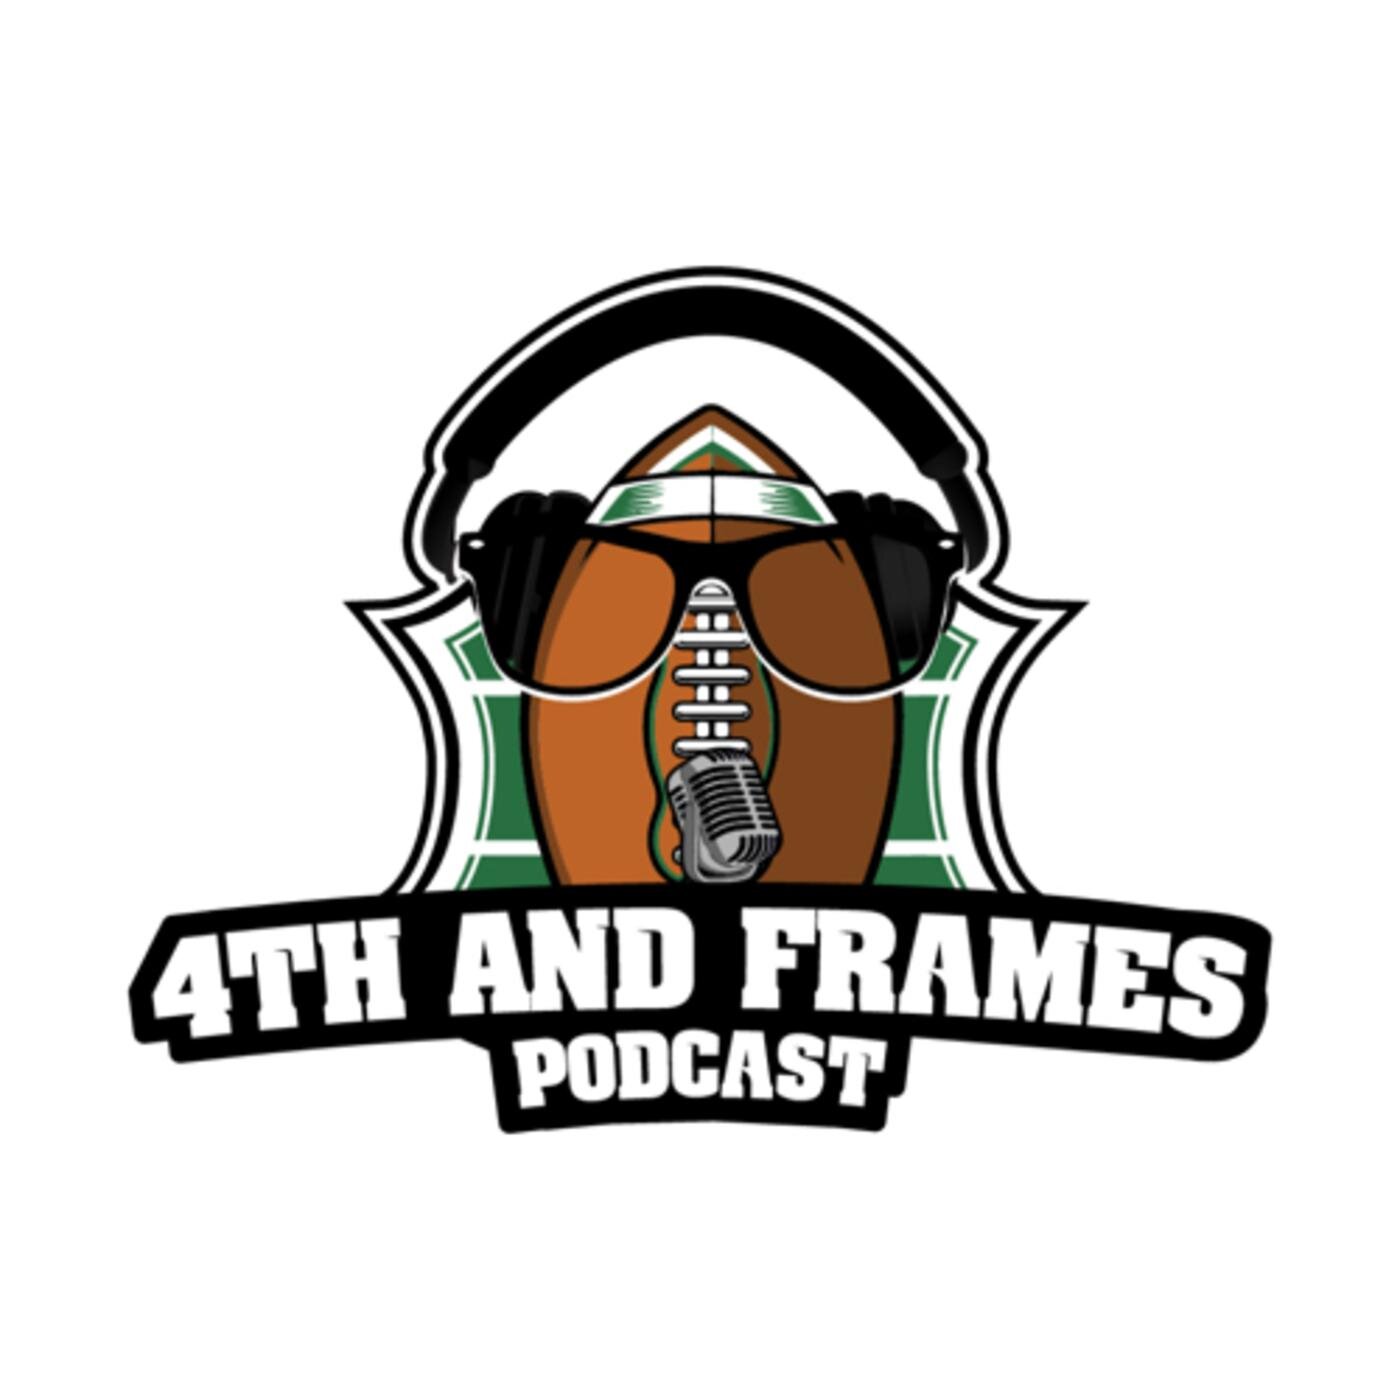 4TH AND FRAMES PODCAST